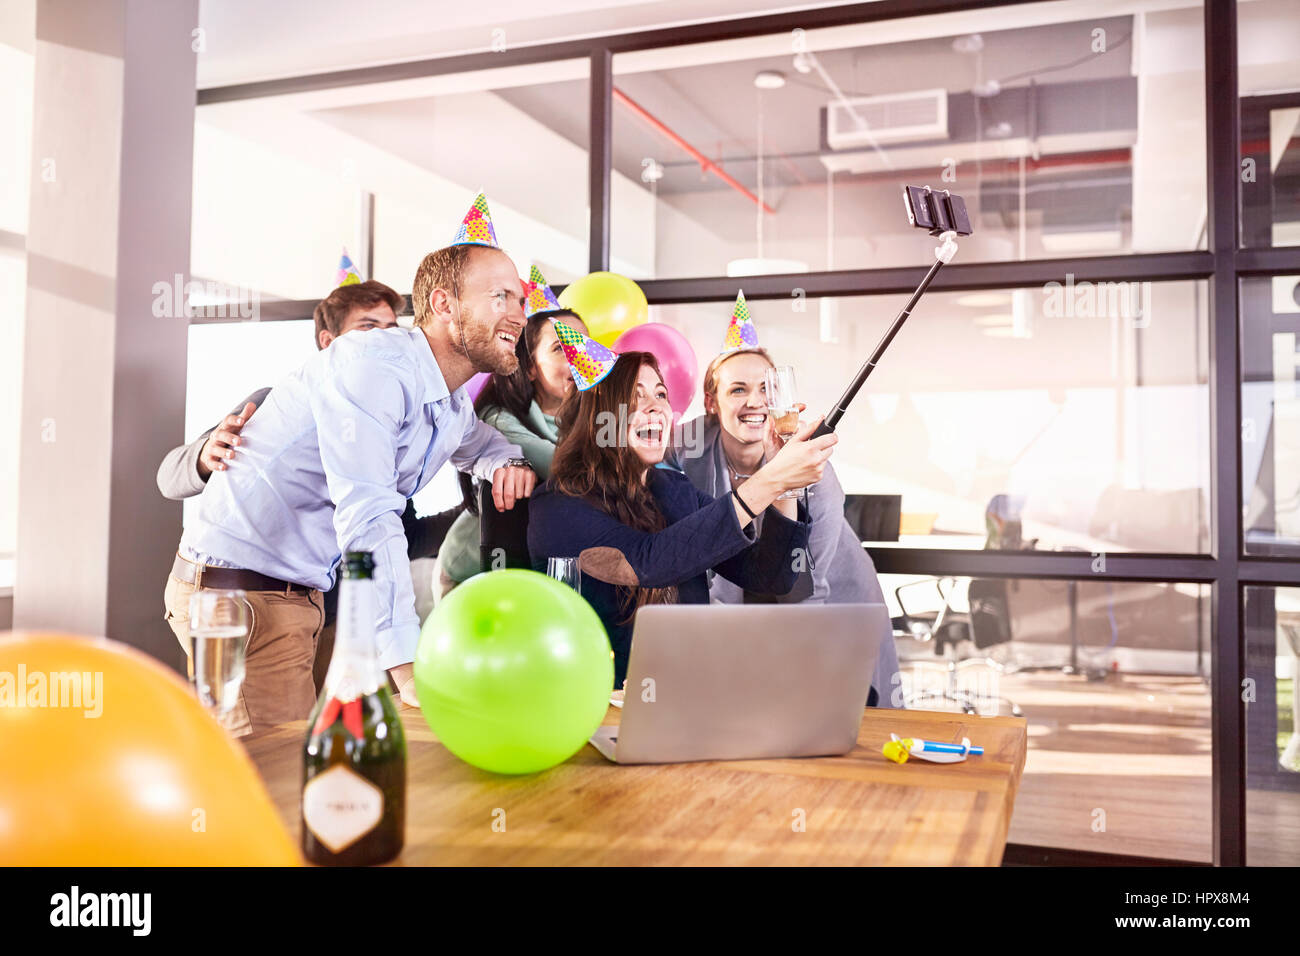 Playful business people celebrating birthday taking selfie with selfie stick in conference room Stock Photo